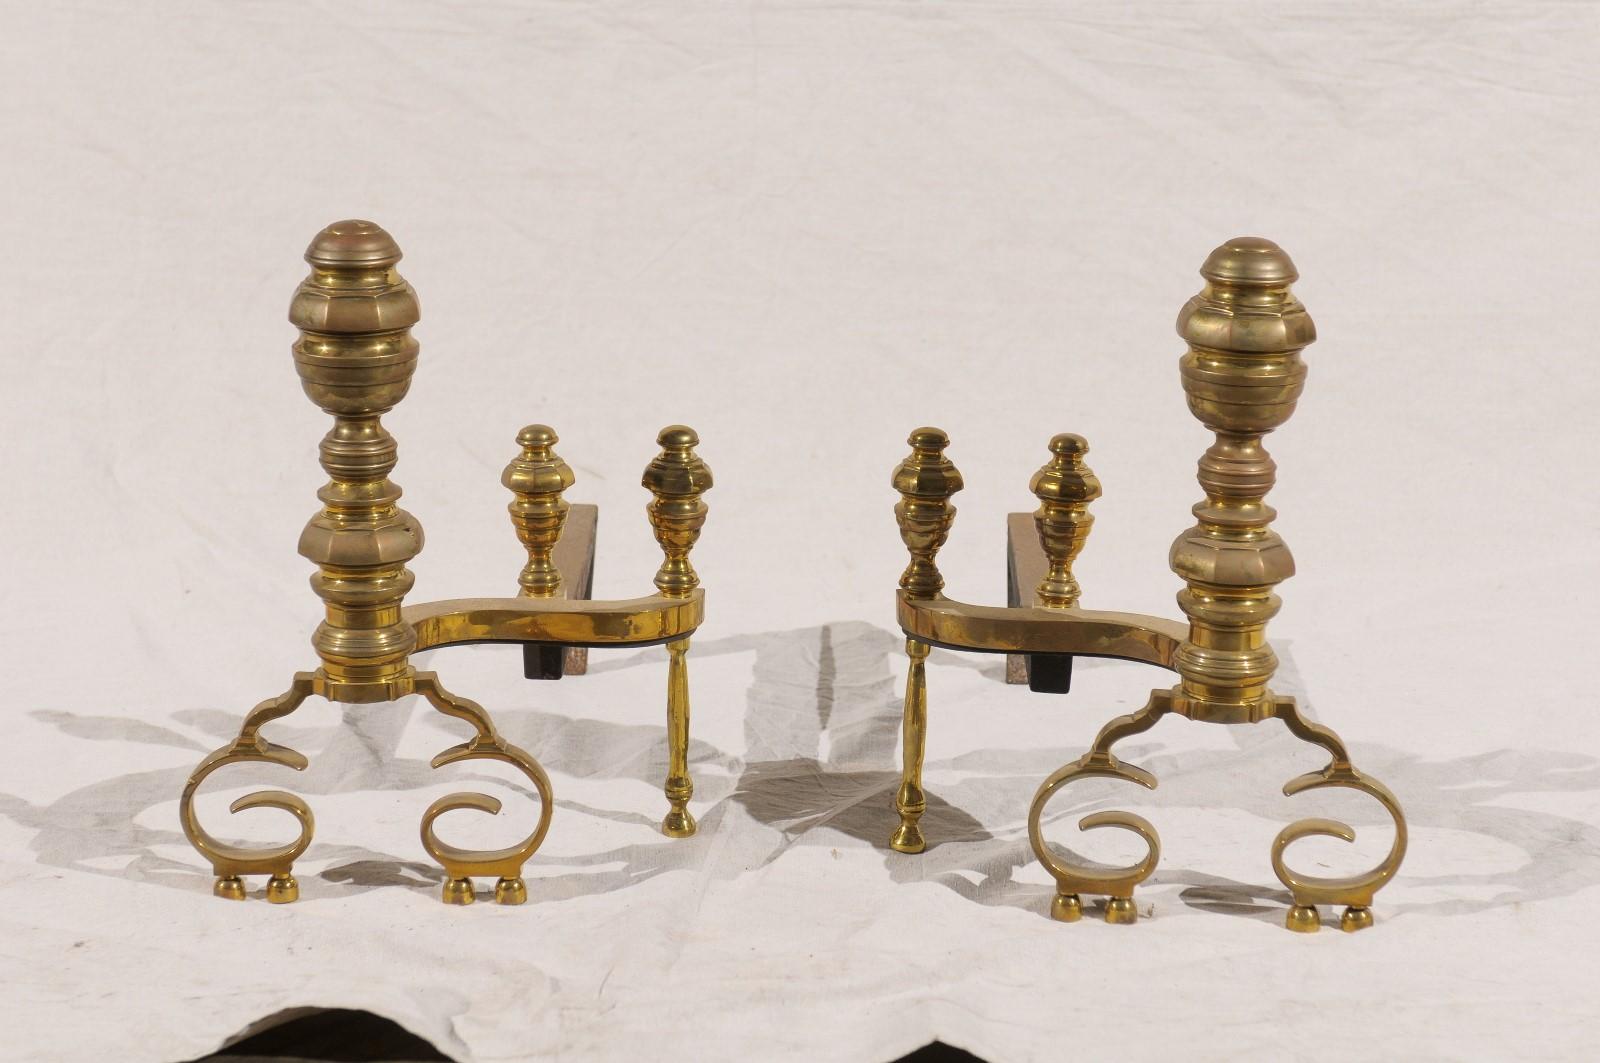 Pair of 19th-20th century Federal style turned brass andirons.